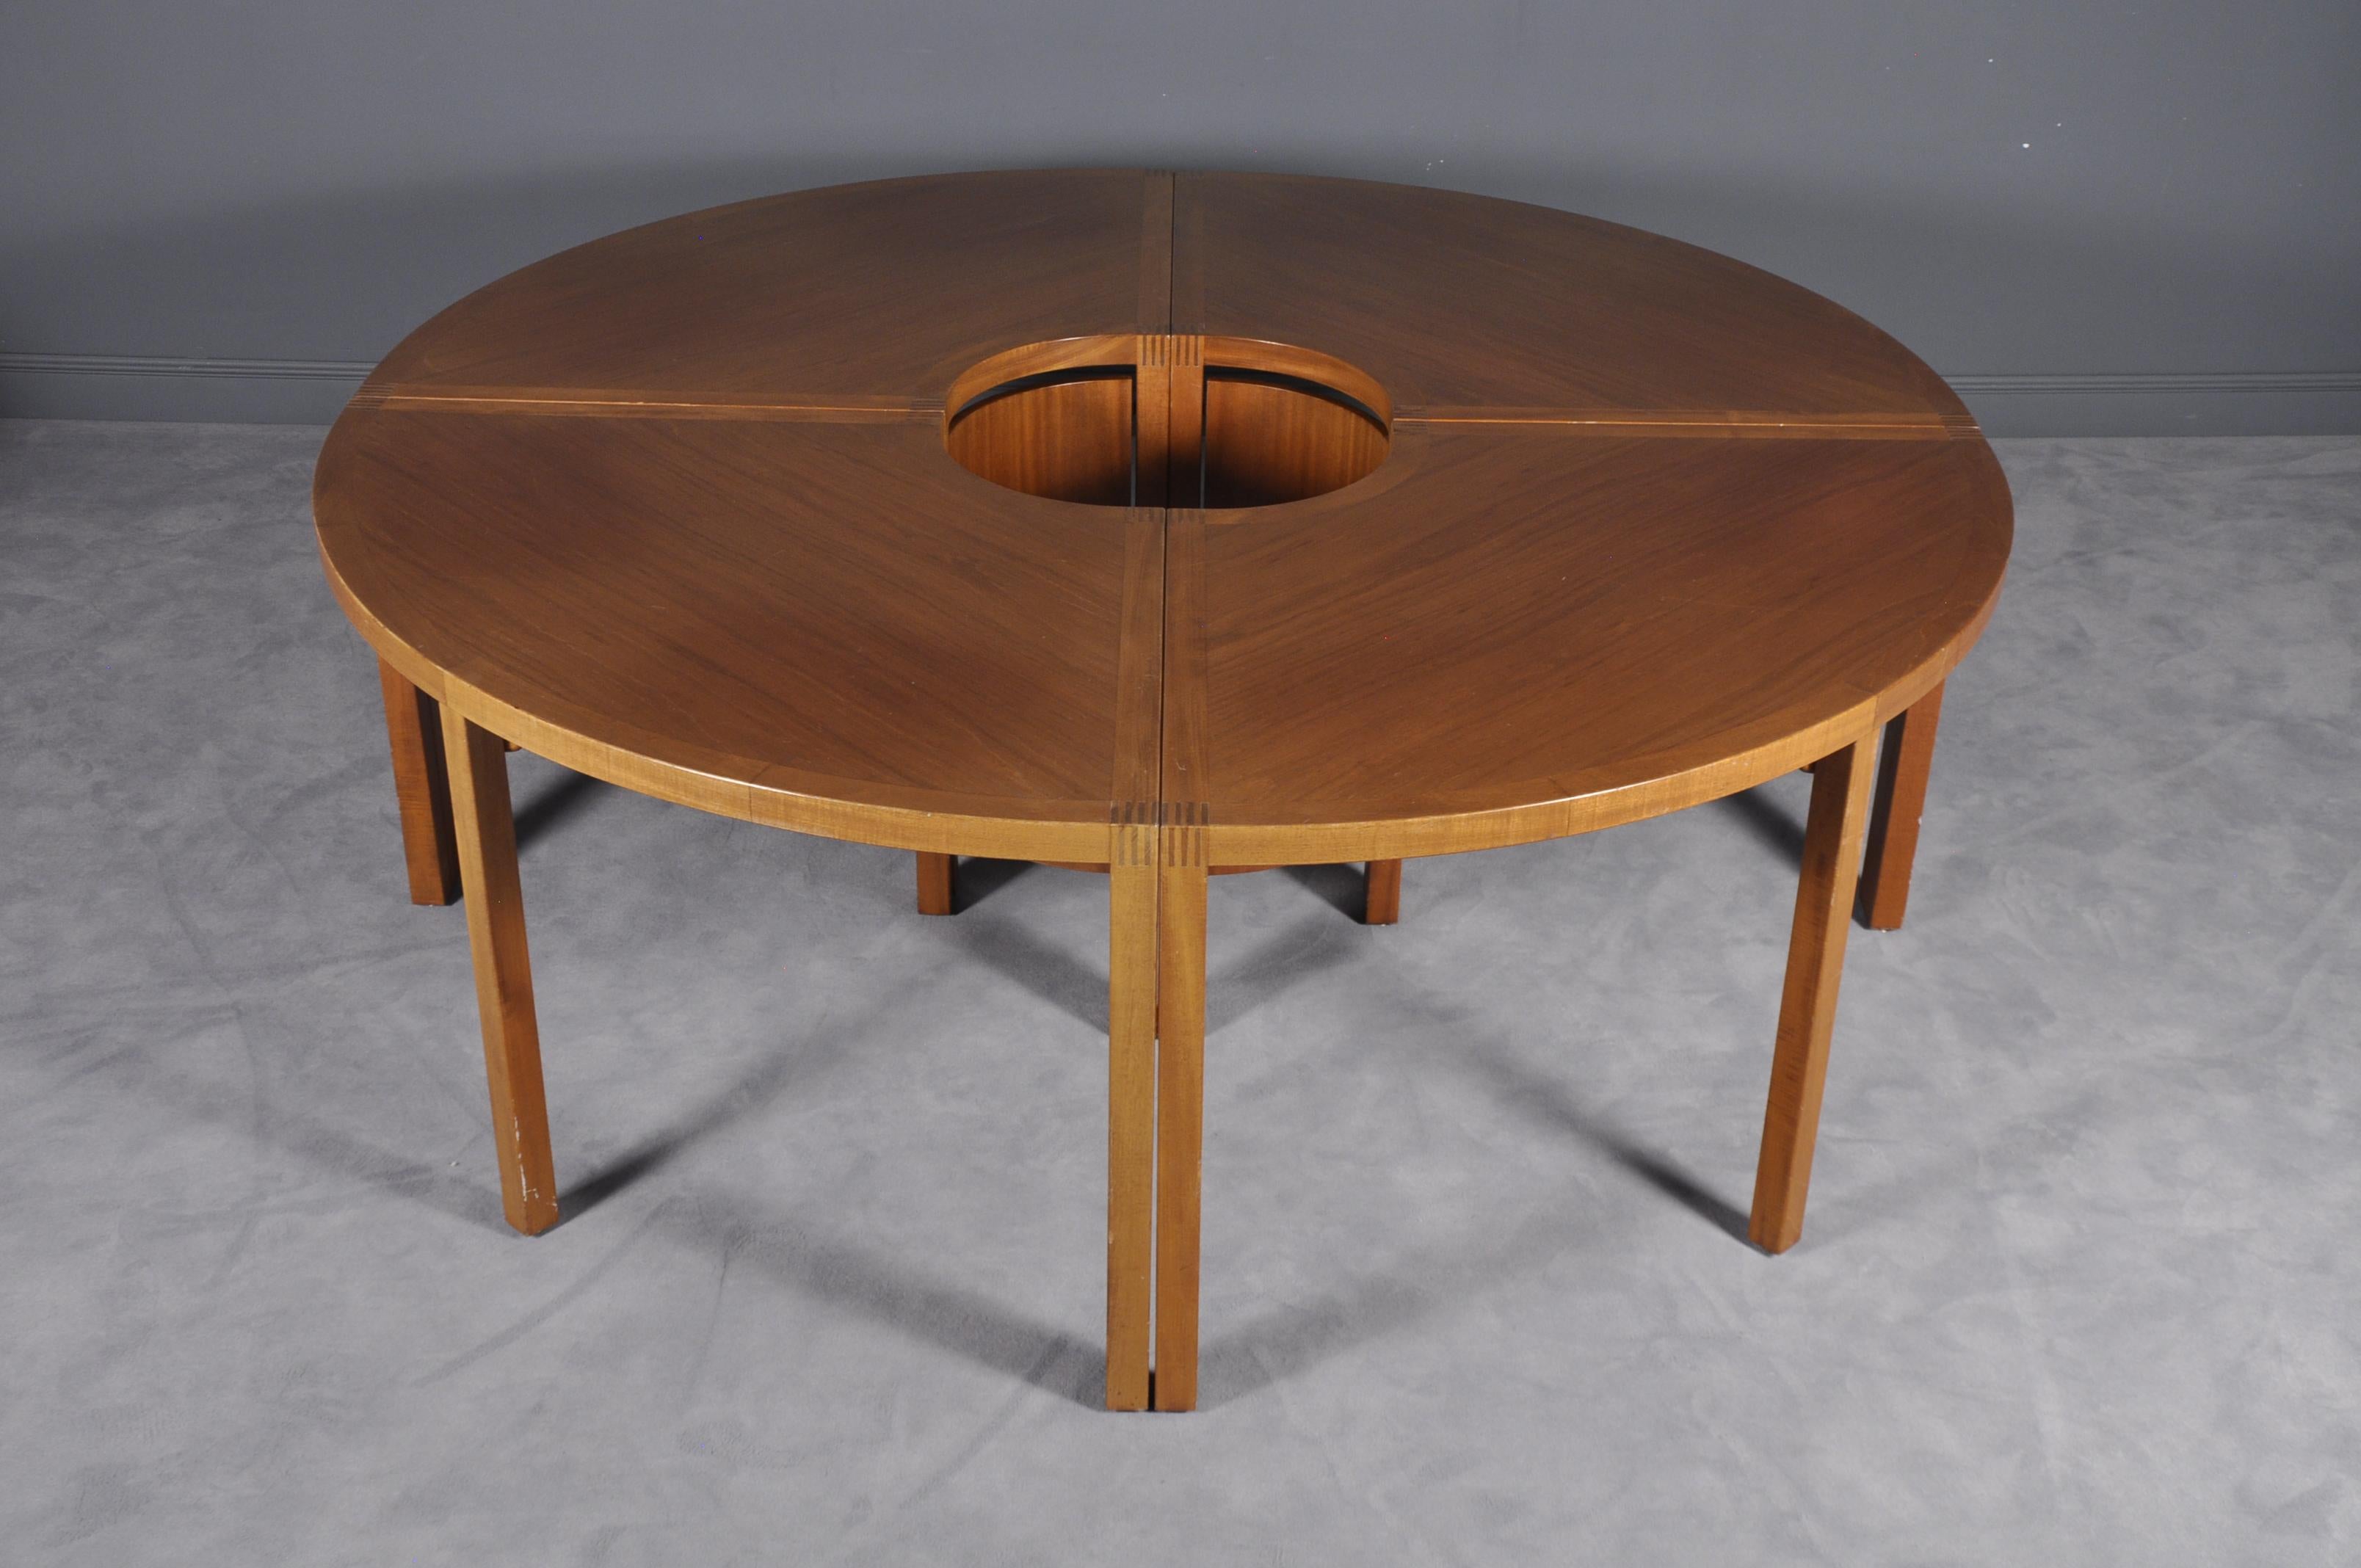 Conference Table and Eight “Riksdagen” Chairs by Åke Axelsson for Gärsnäs, 1981 For Sale 1